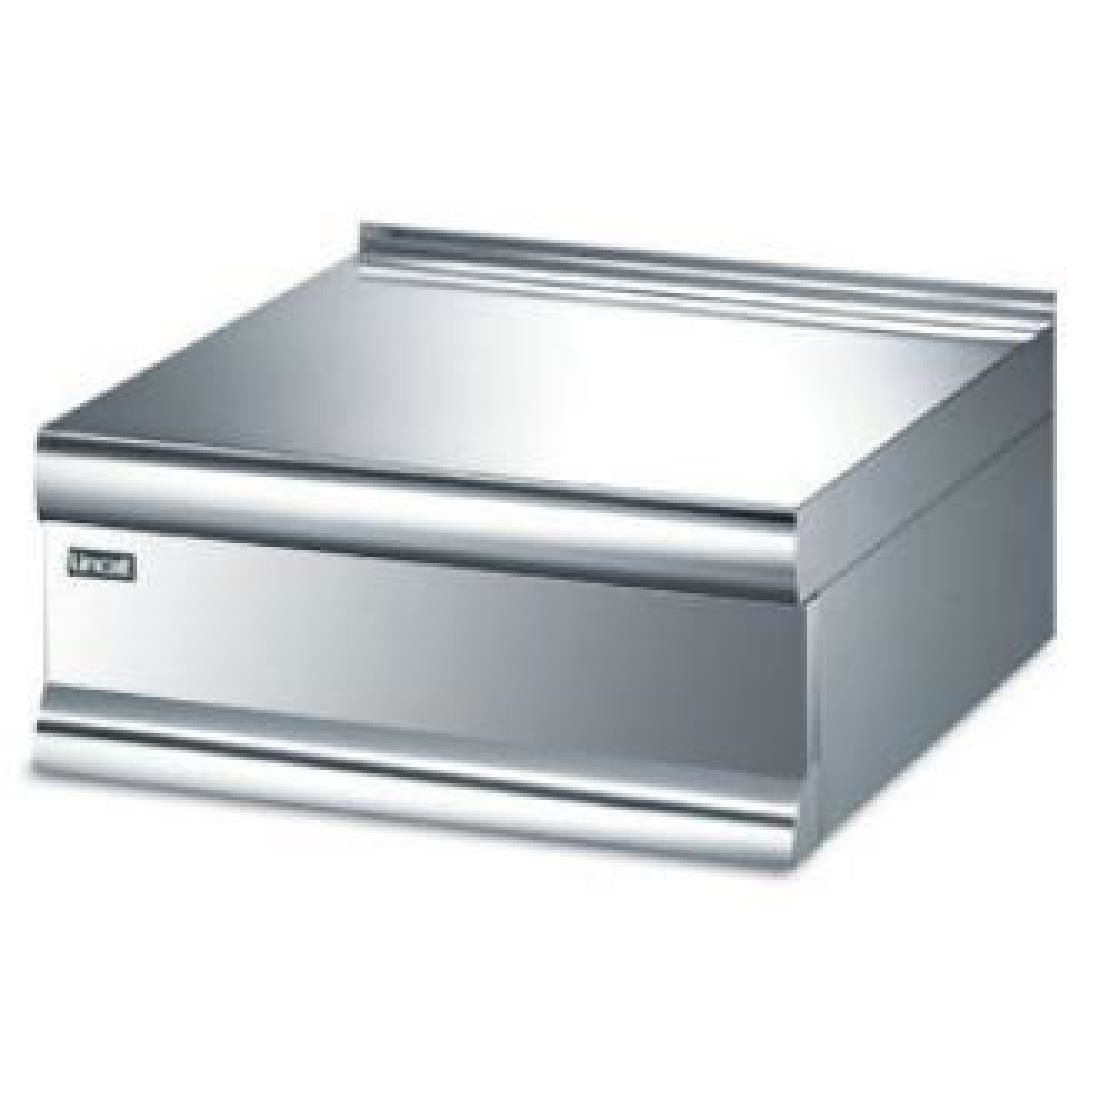 E569 Lincat Silverlink 600 Worktop Without Drawer JD Catering Equipment Solutions Ltd